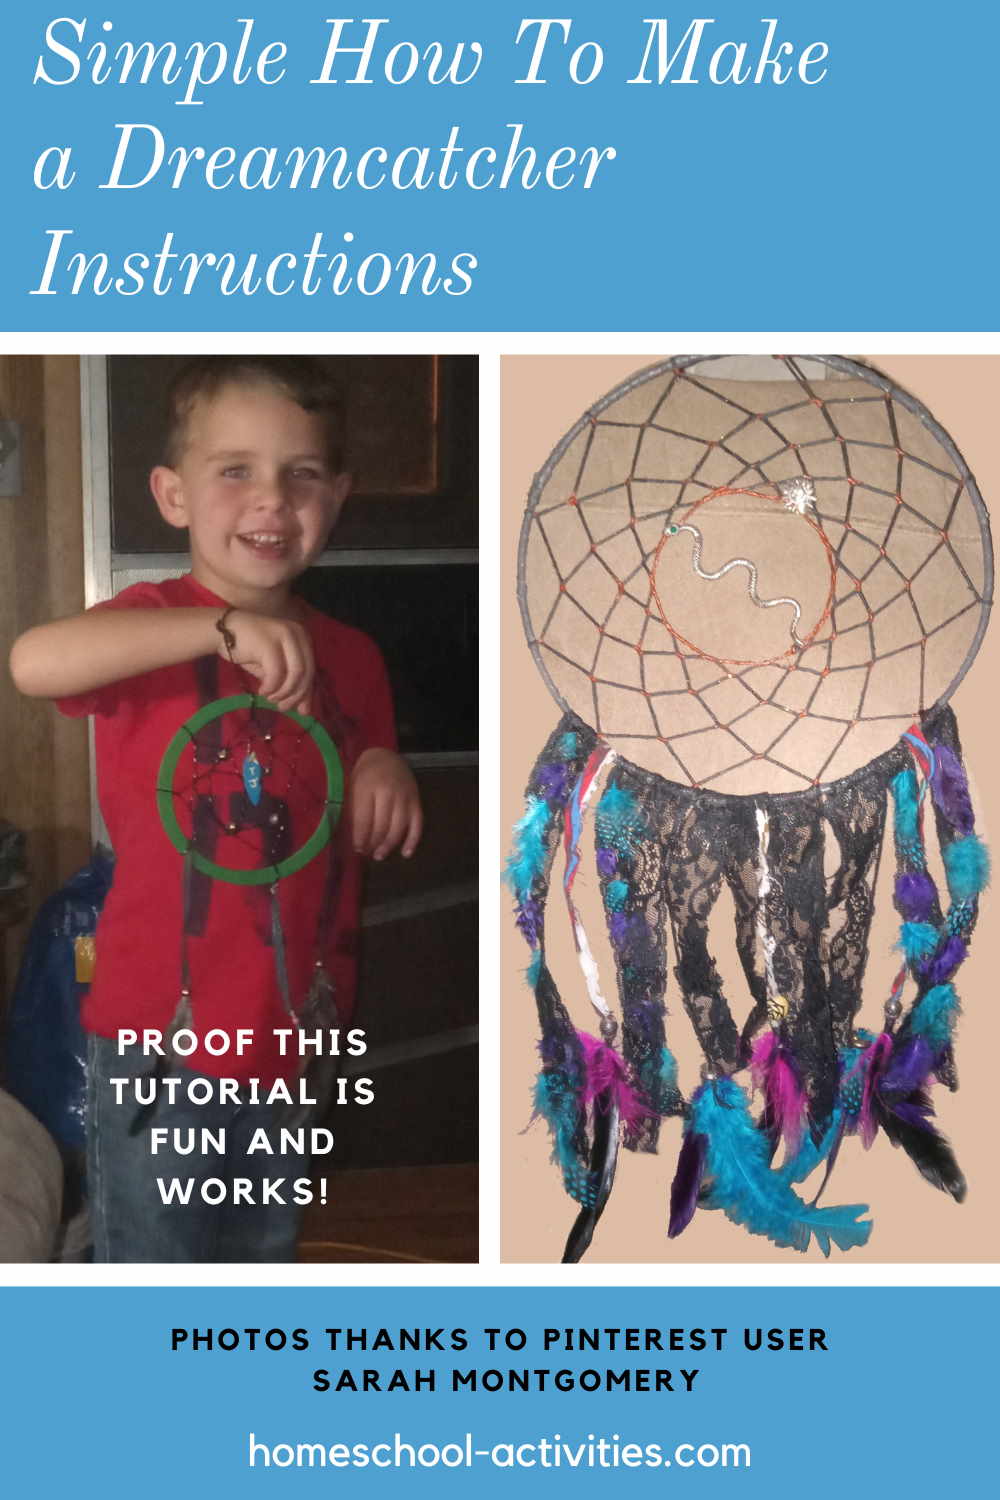 Diy dreamcatcher following this fun tutorial made by Pinterest user Sarah Montgomery